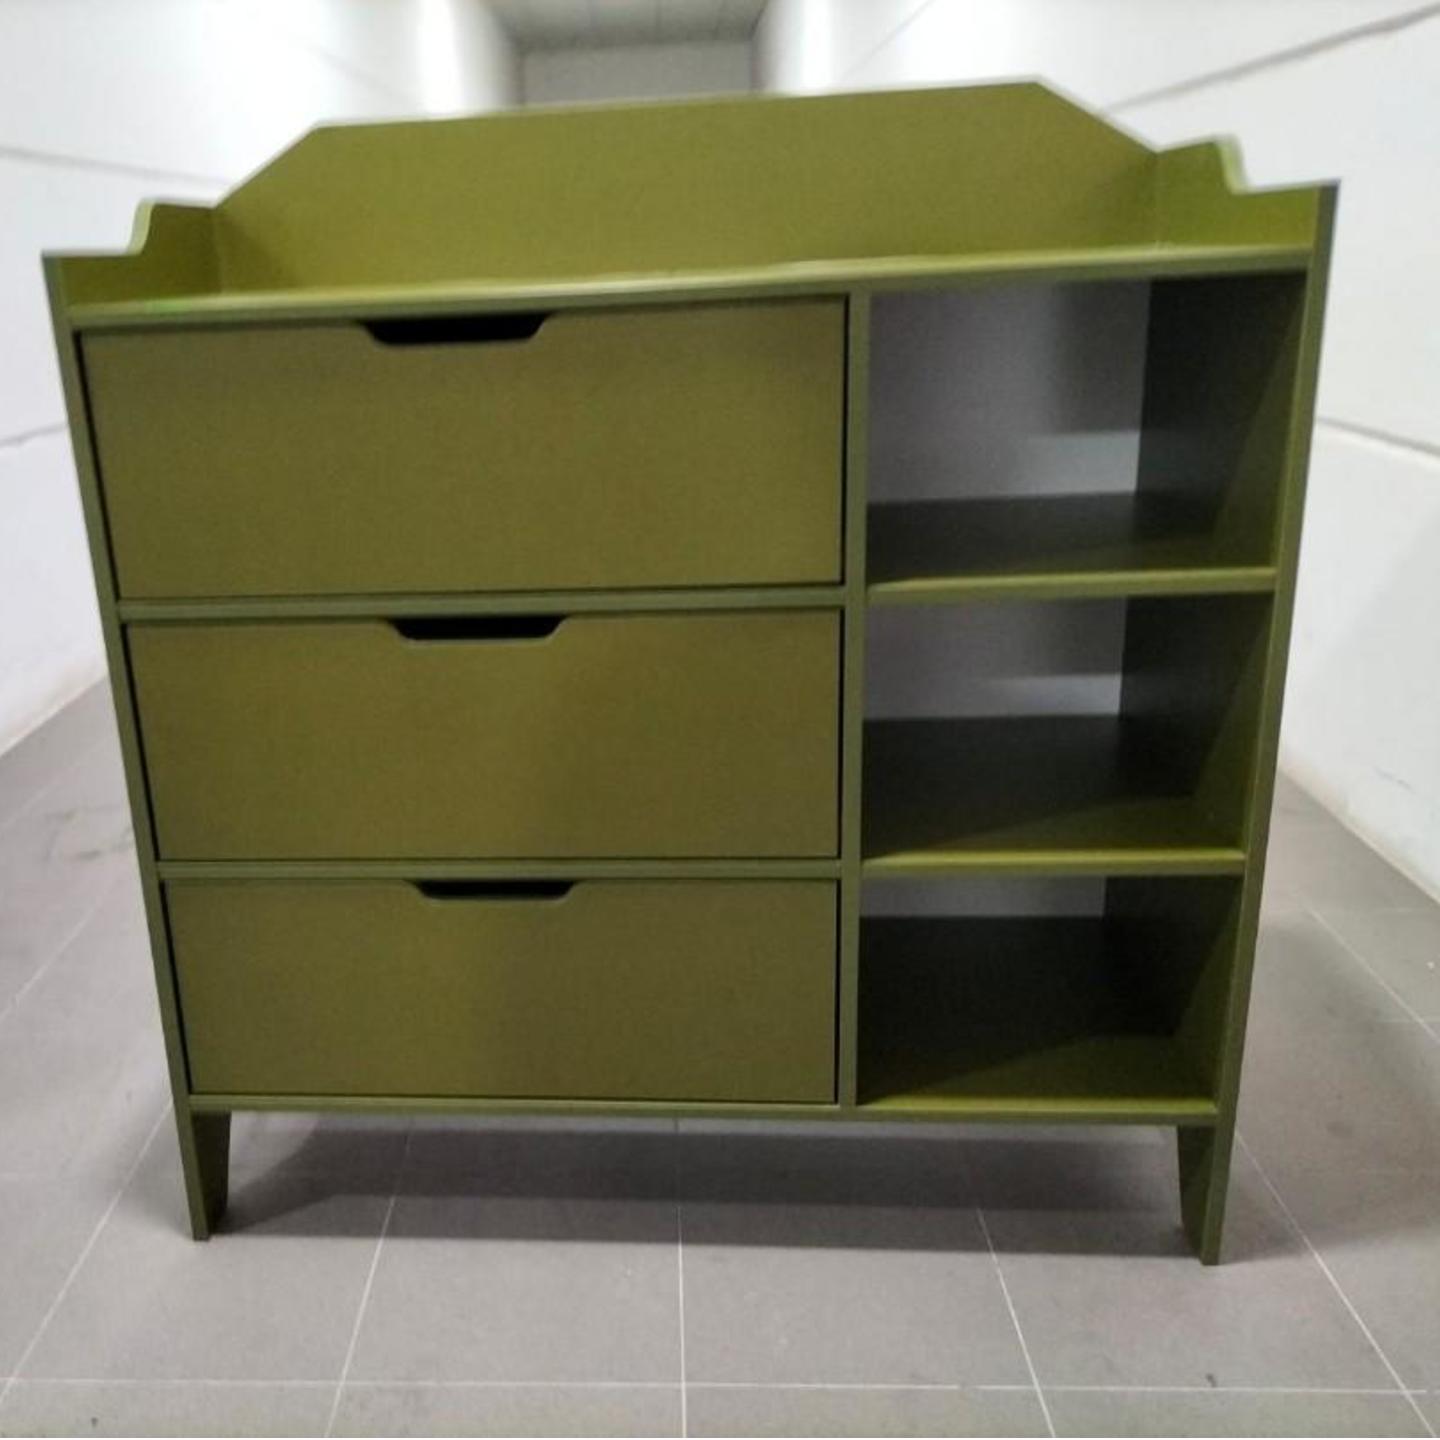 YIVAN Chest of Drawers in OLIVE GREEN